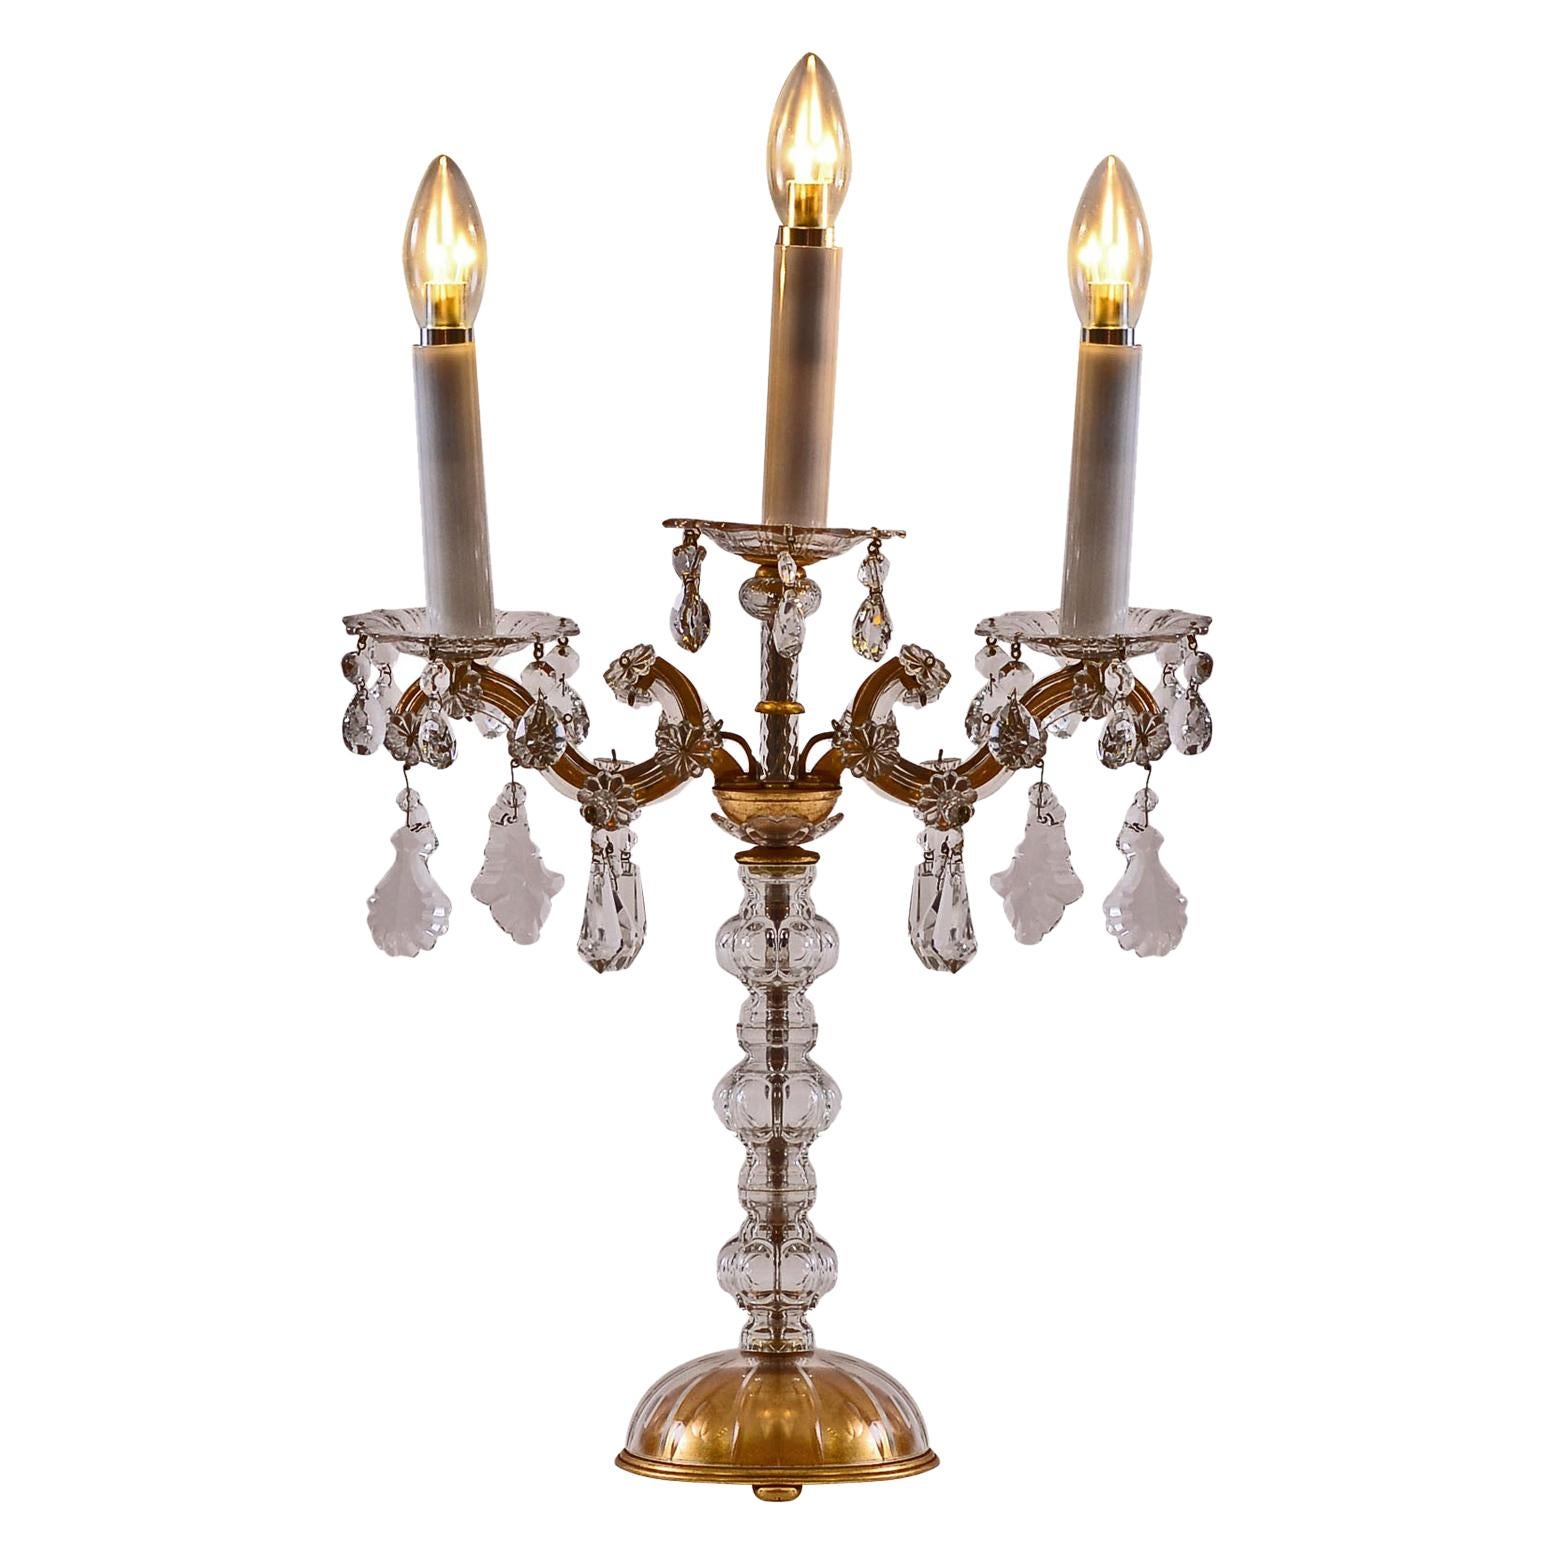  Baroque style Maria Theresia Table Light Candelabra 20th Century Original 1920  For Sale